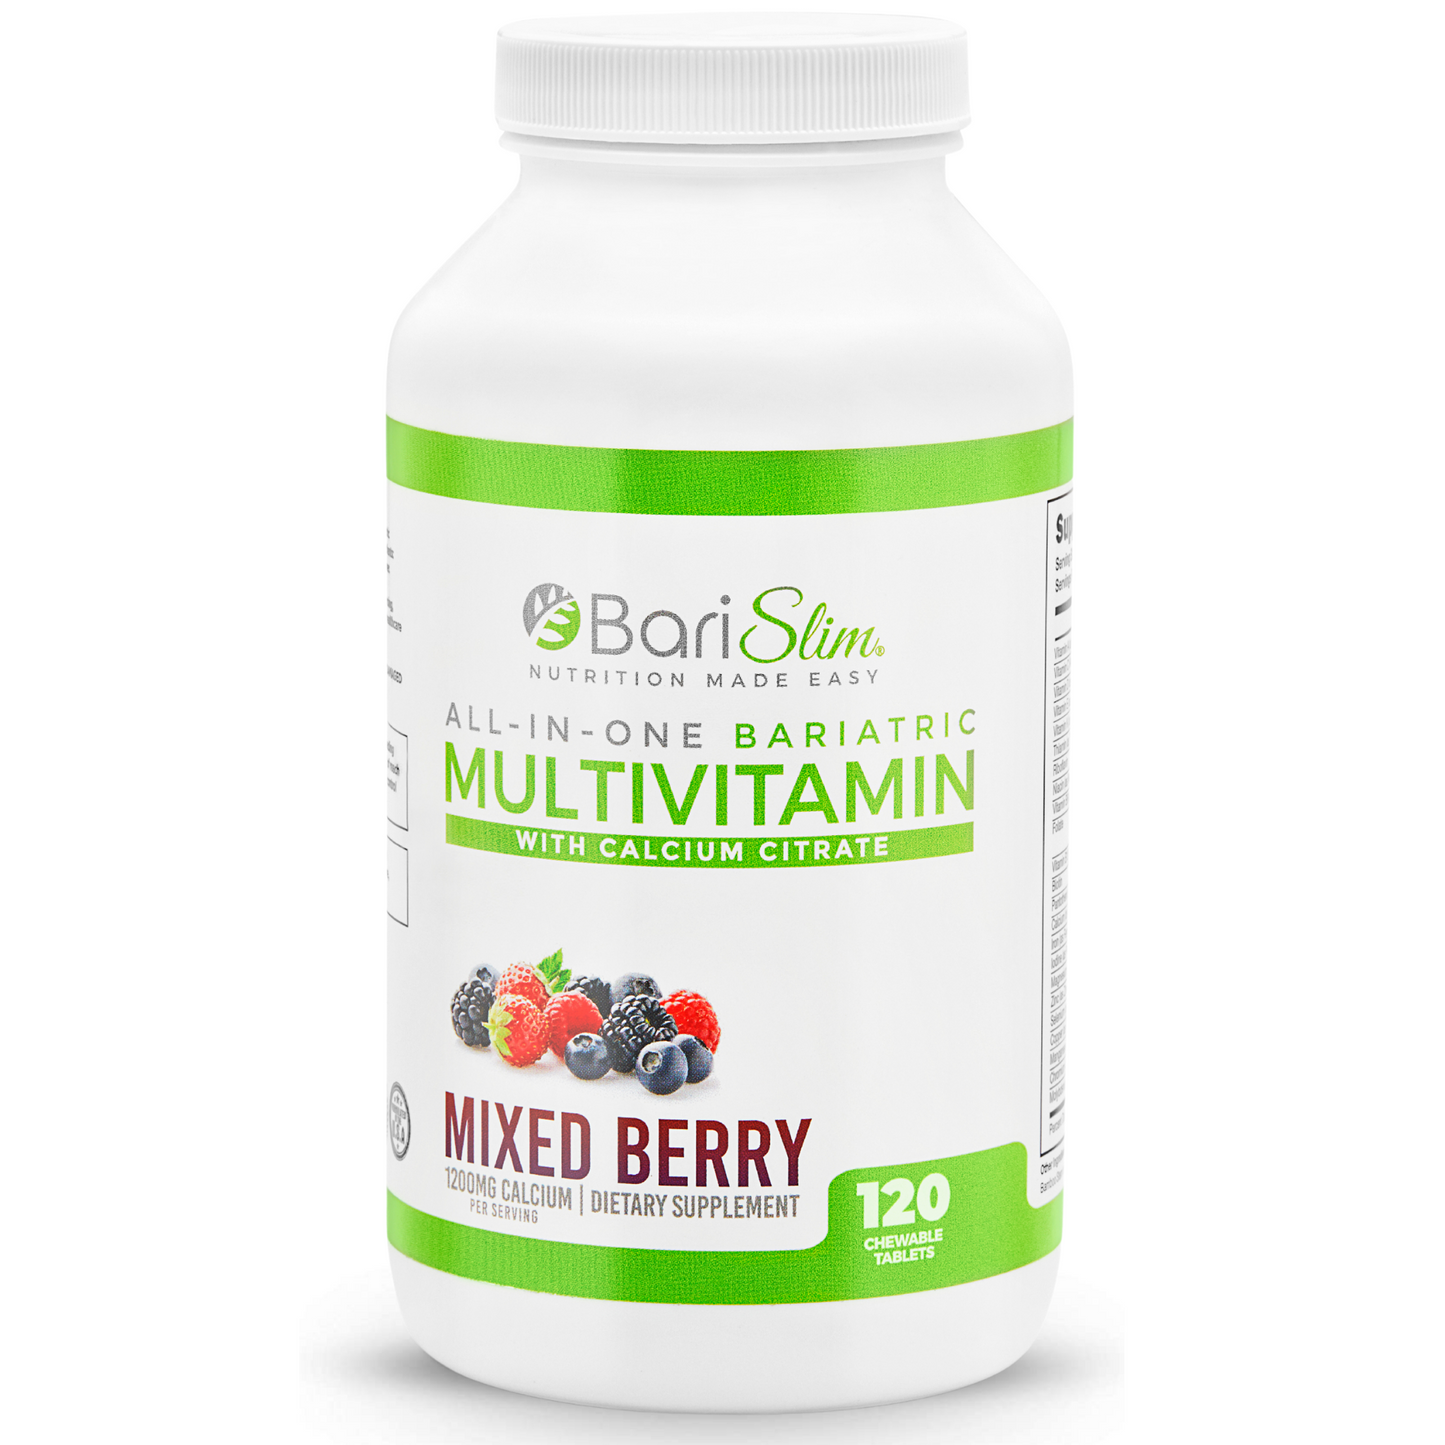 All-In-One Bariatric Chewable Multivitamin - Mixed berry flavor